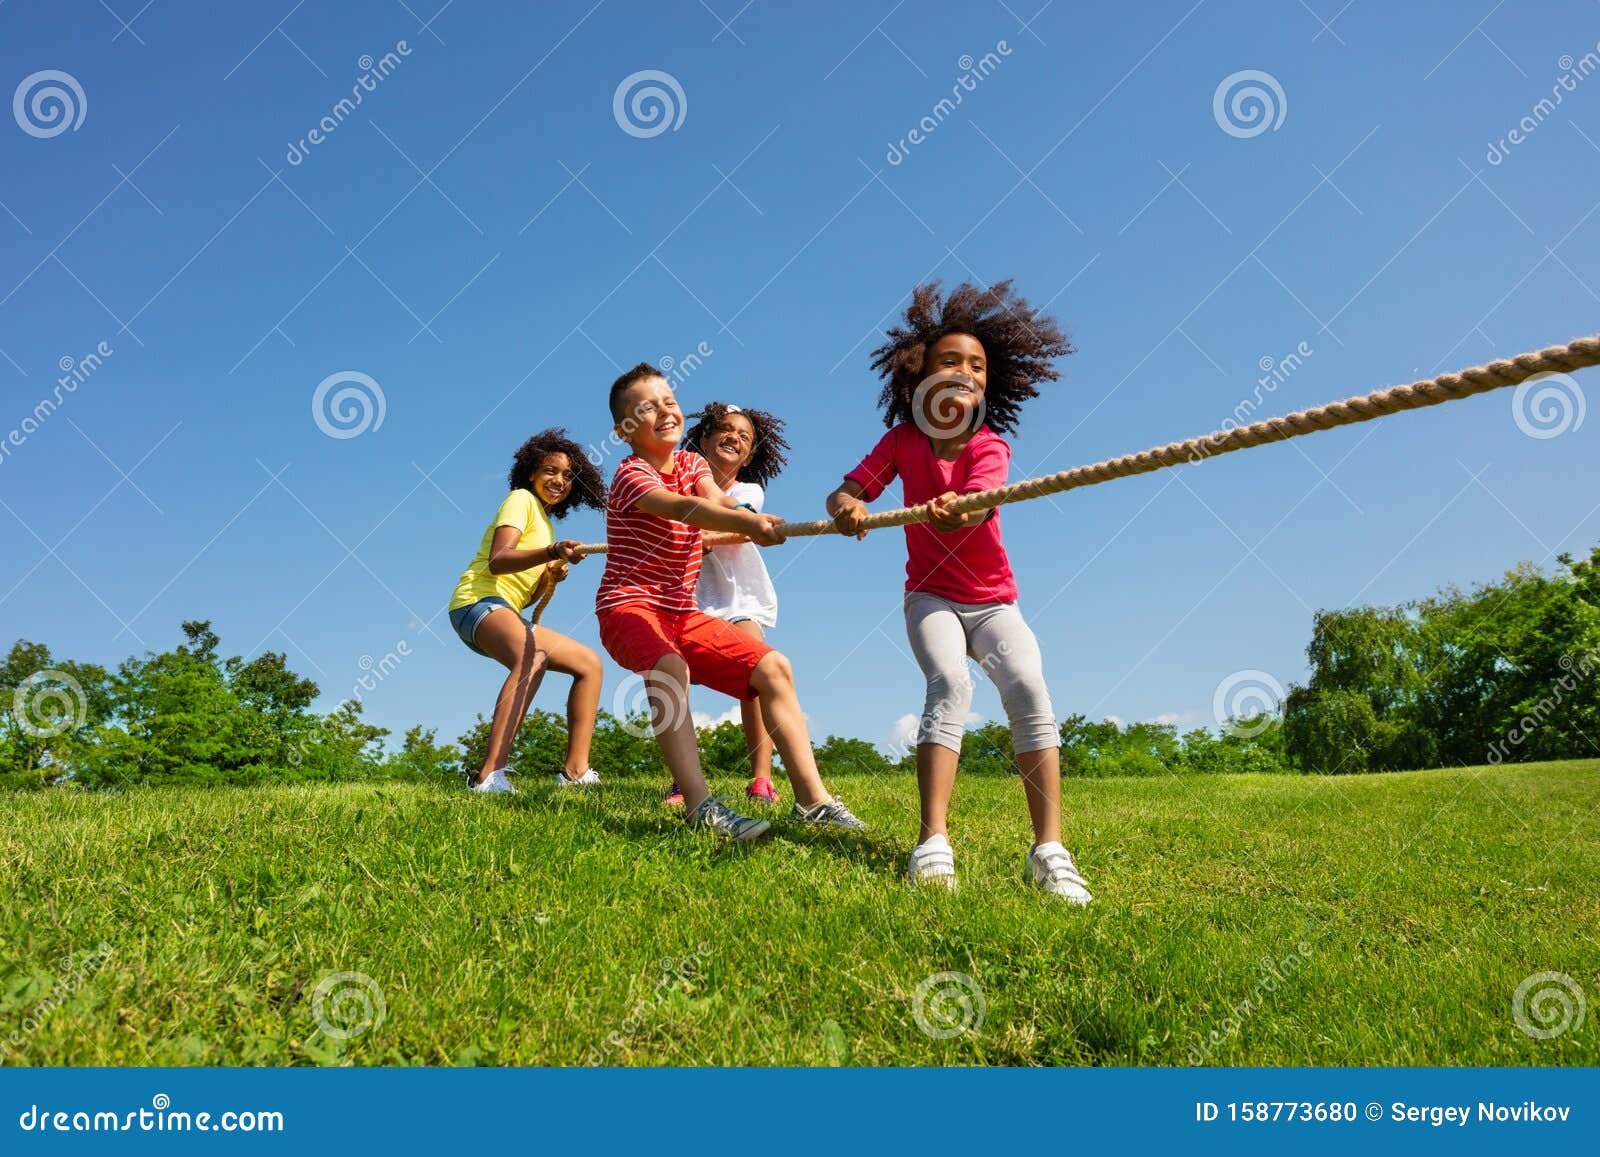 https://thumbs.dreamstime.com/z/group-kids-pull-rope-strong-force-emotion-over-blue-sky-park-kids-pull-rope-competitive-fun-game-park-158773680.jpg